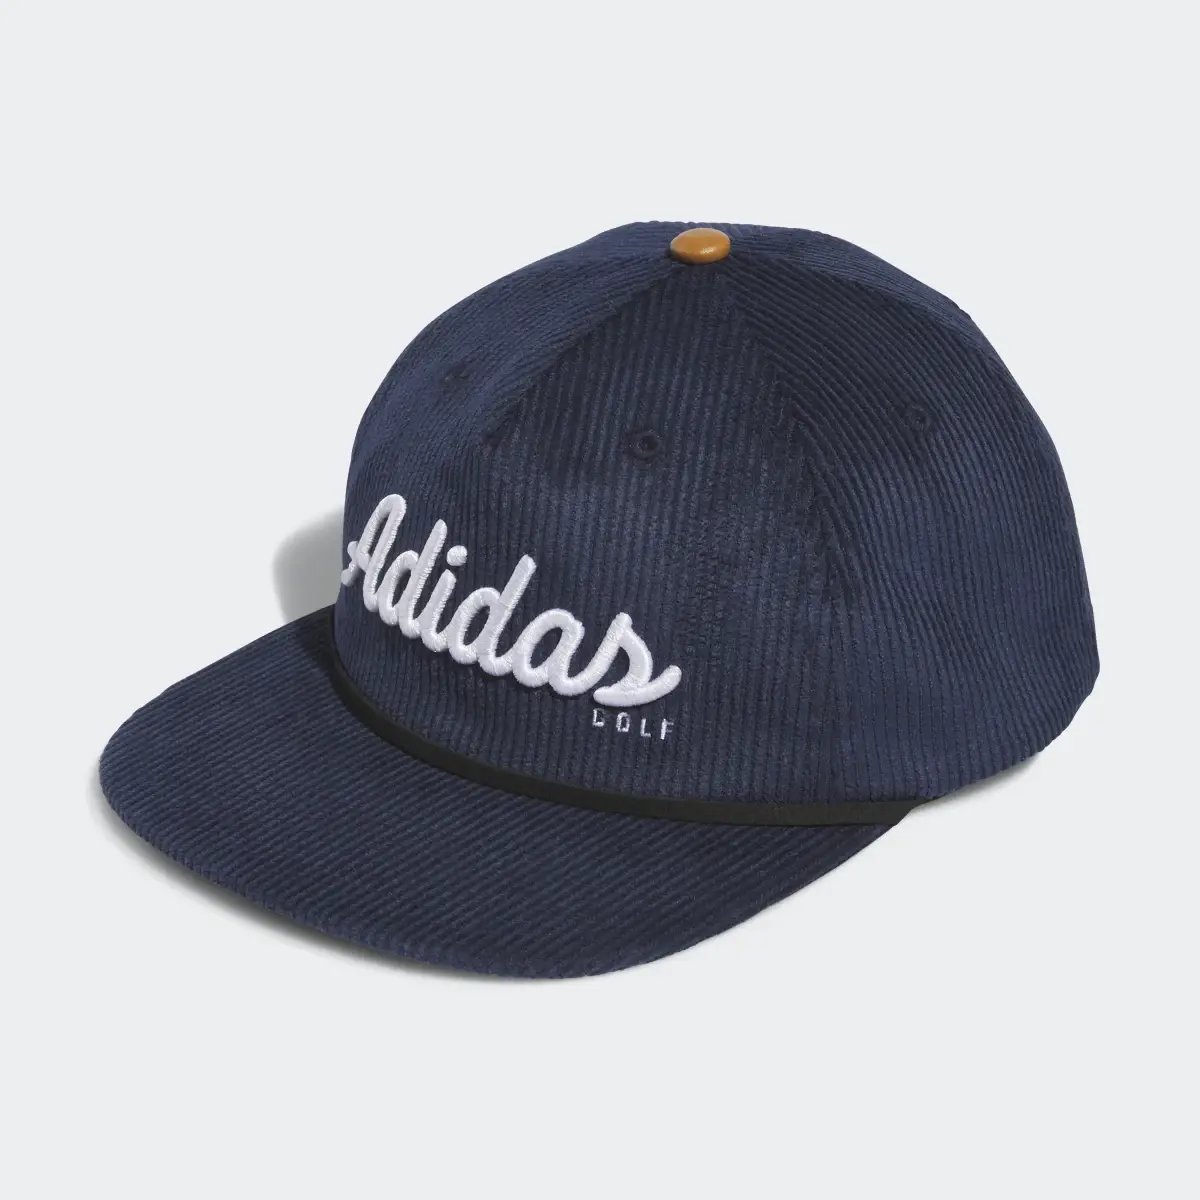 Adidas Corduroy Leather Five-Panel Rope Golf Hat. 2